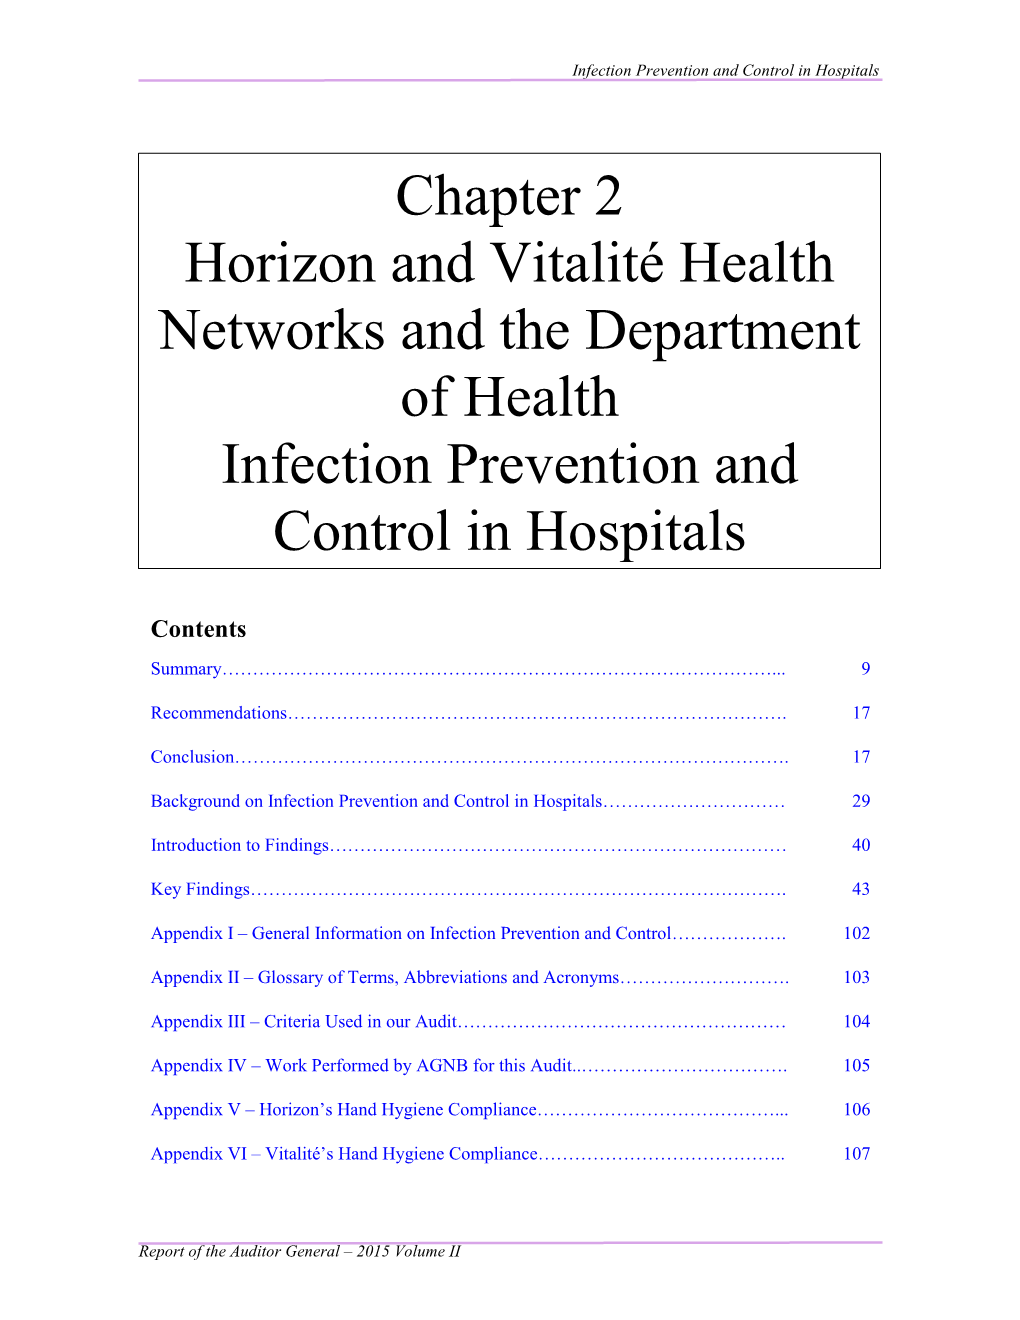 Chapter 2 Horizon and Vitalité Health Networks and the Department Of